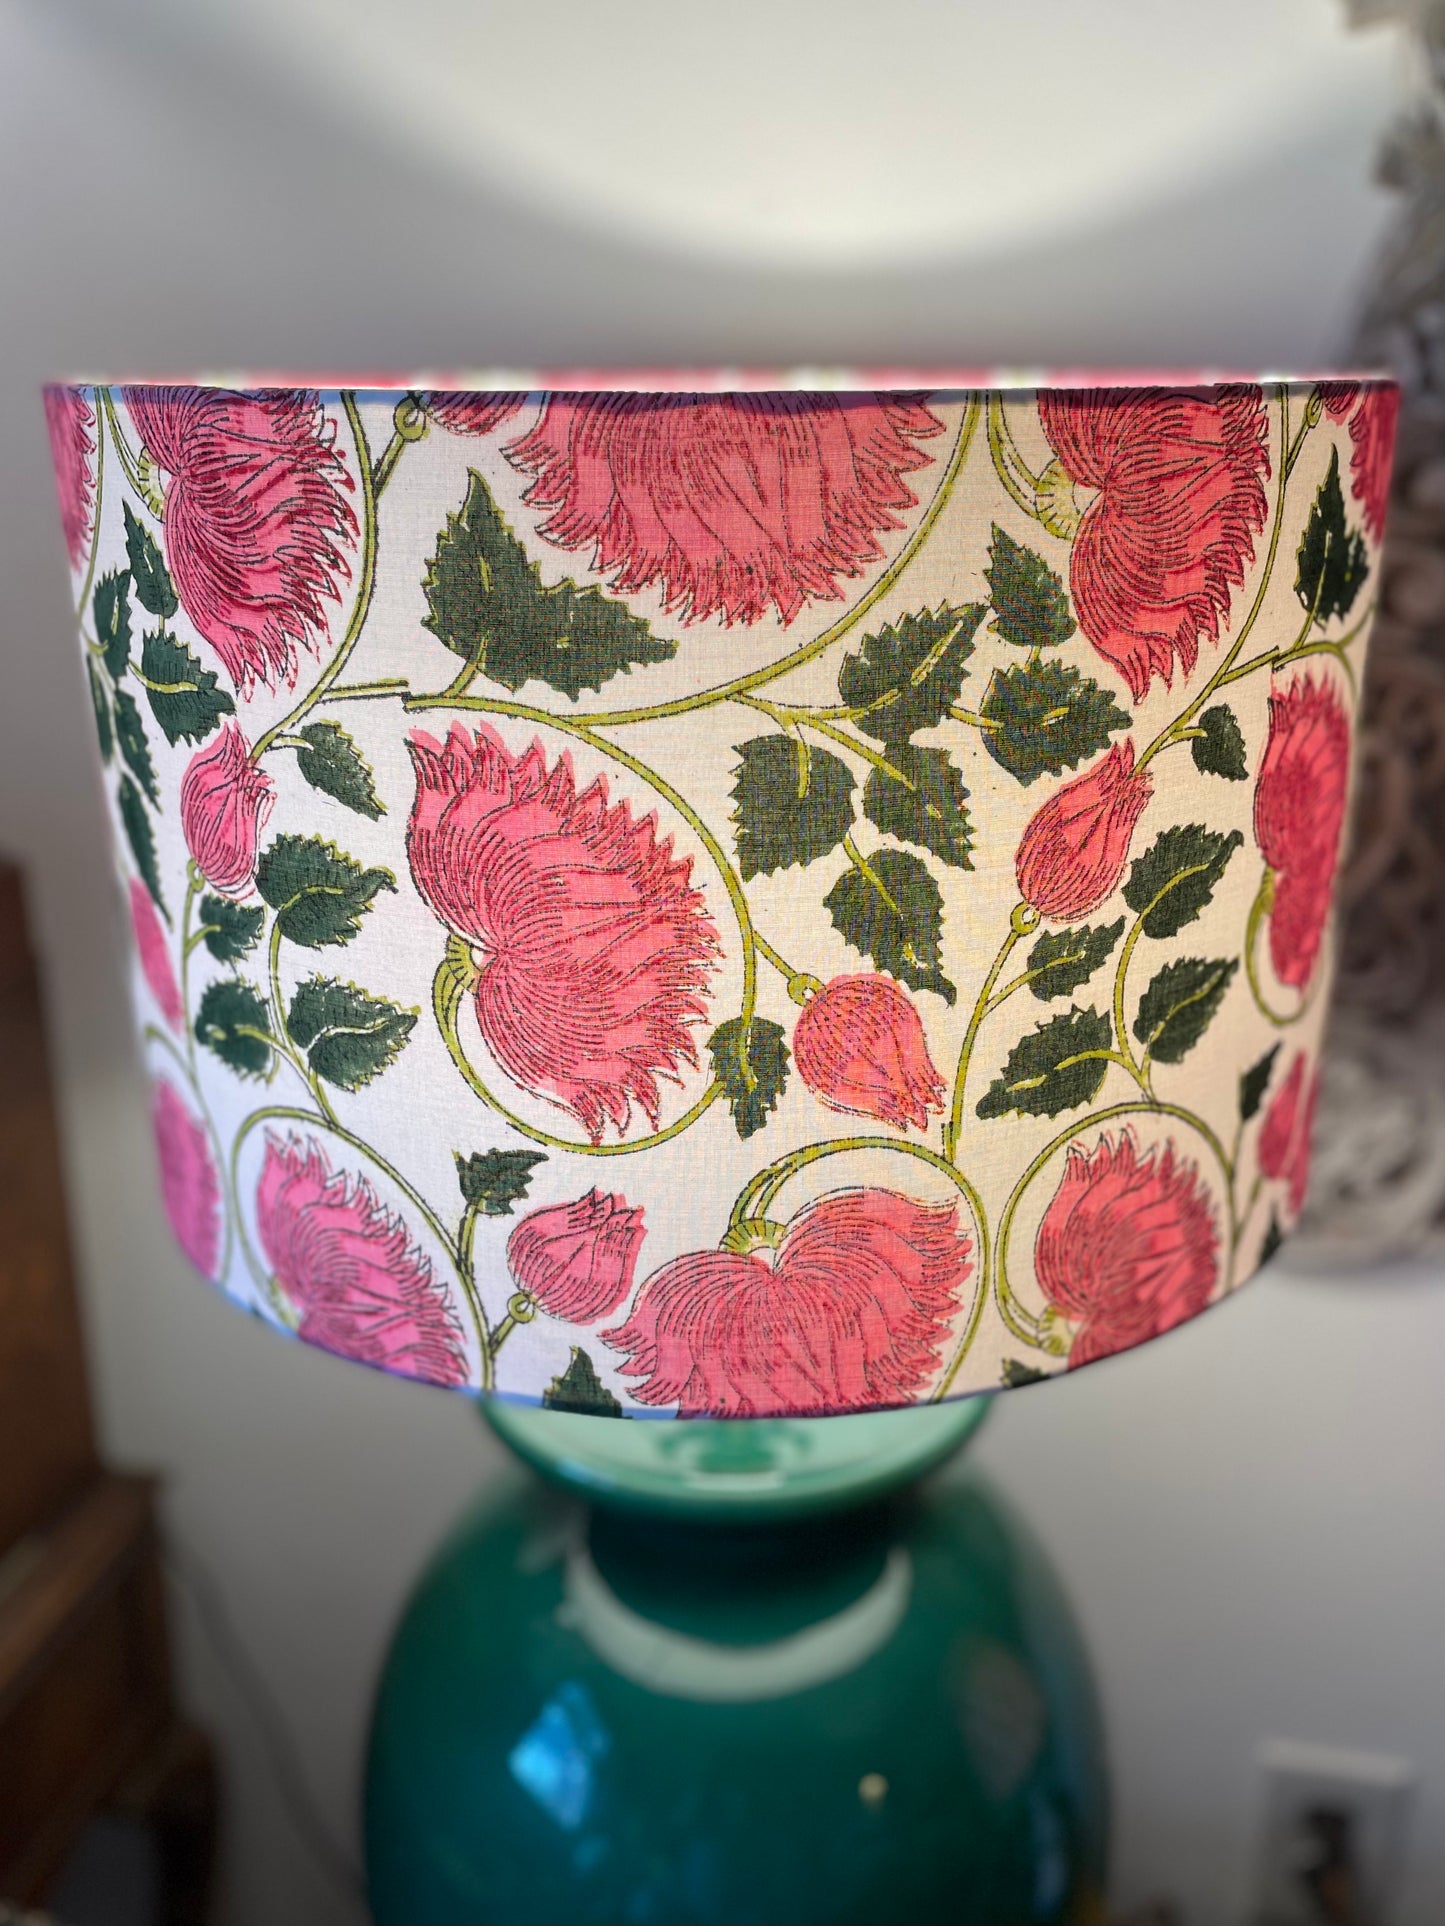 16 Inch Drum Lampshade. Indian Hand Block Print. Big Pink Blossoms with Jungle Green Leaves.